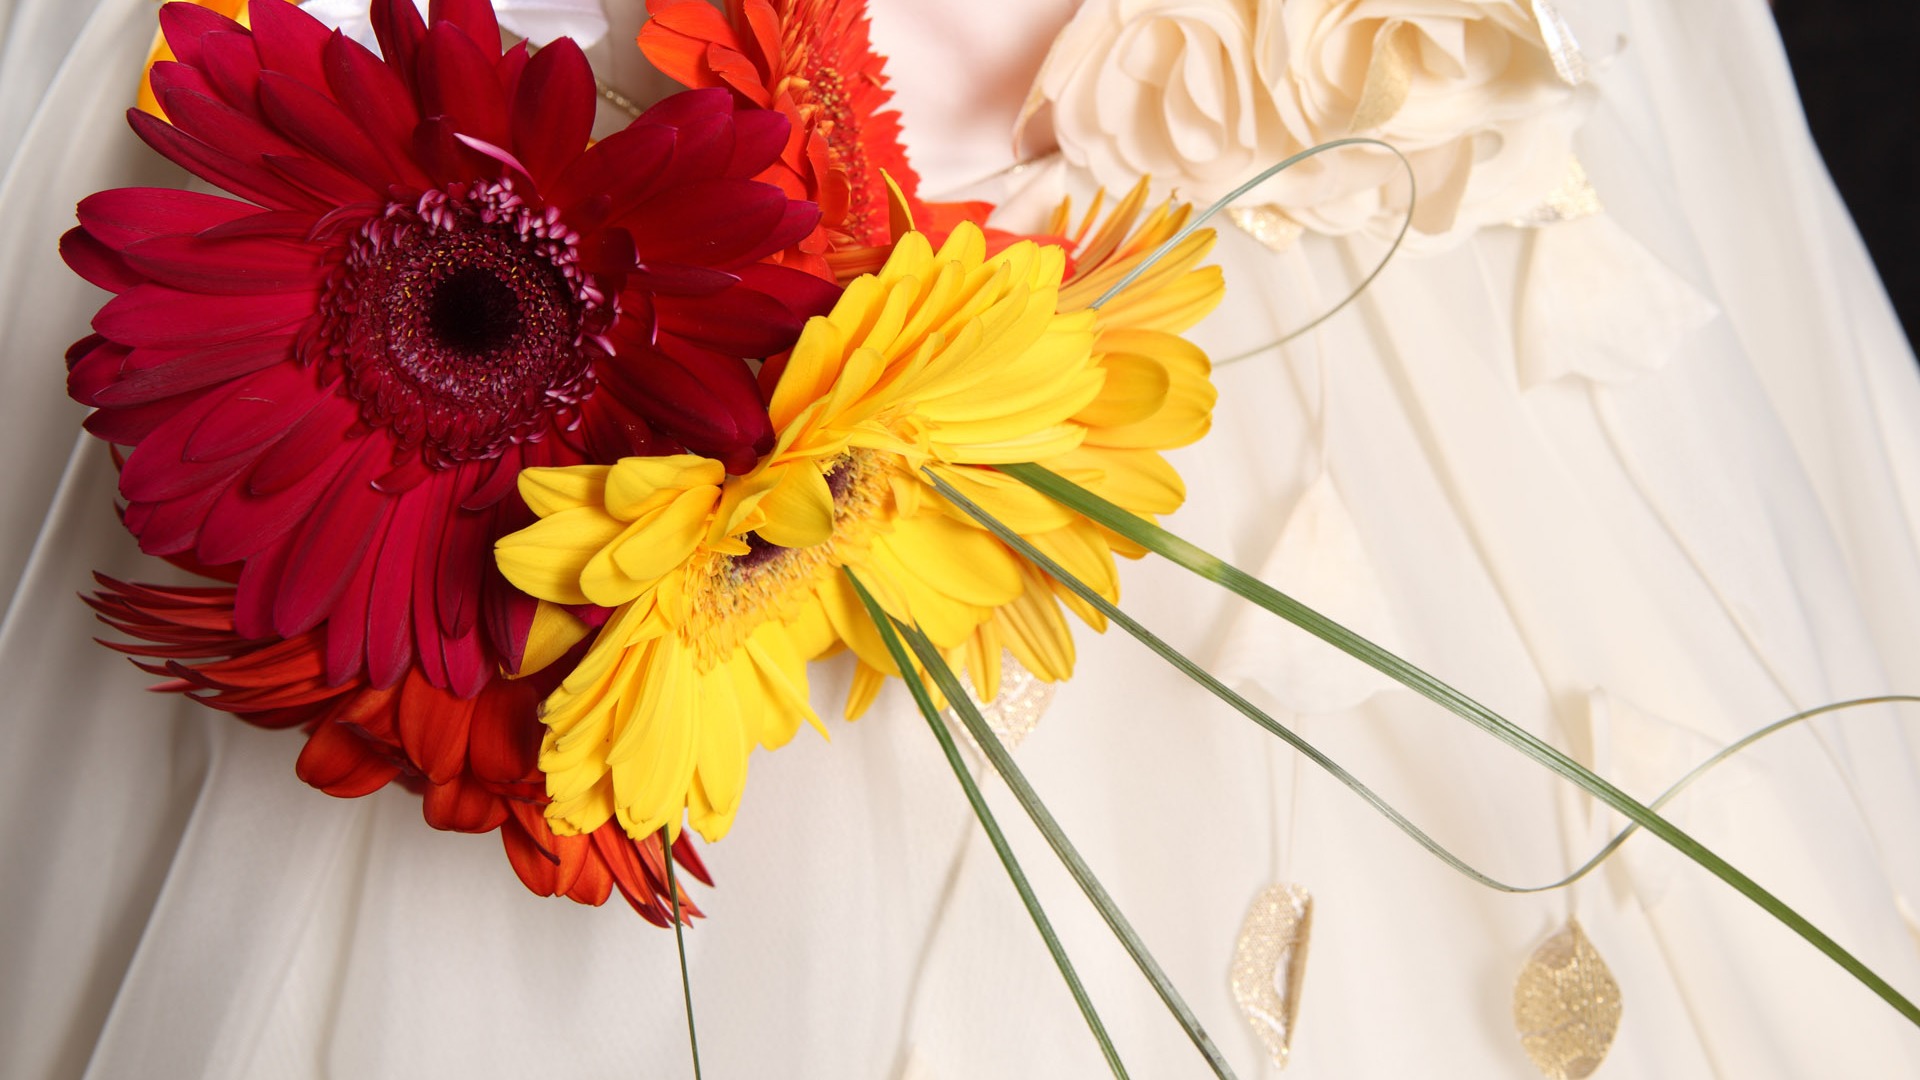 Weddings and Flowers wallpaper (2) #8 - 1920x1080